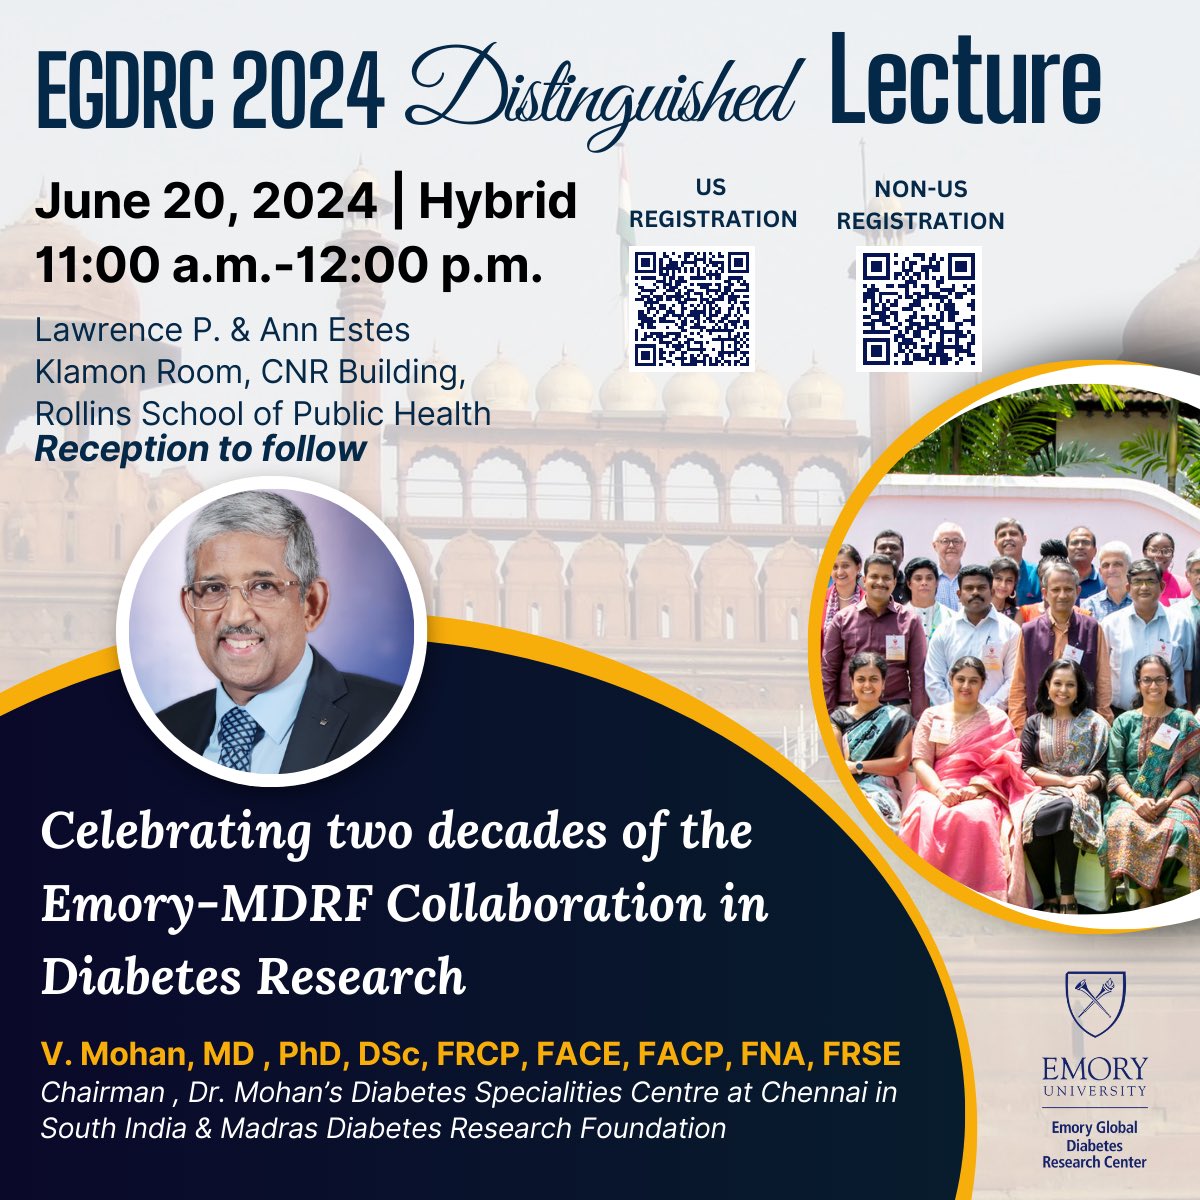 Come join us to honor ⁦@drmohanv⁩ giving the first ⁦@egdrc⁩ Distinguished Lecture ⁦@kmvnarayan14⁩ ⁦@AmDiabetesAssn⁩